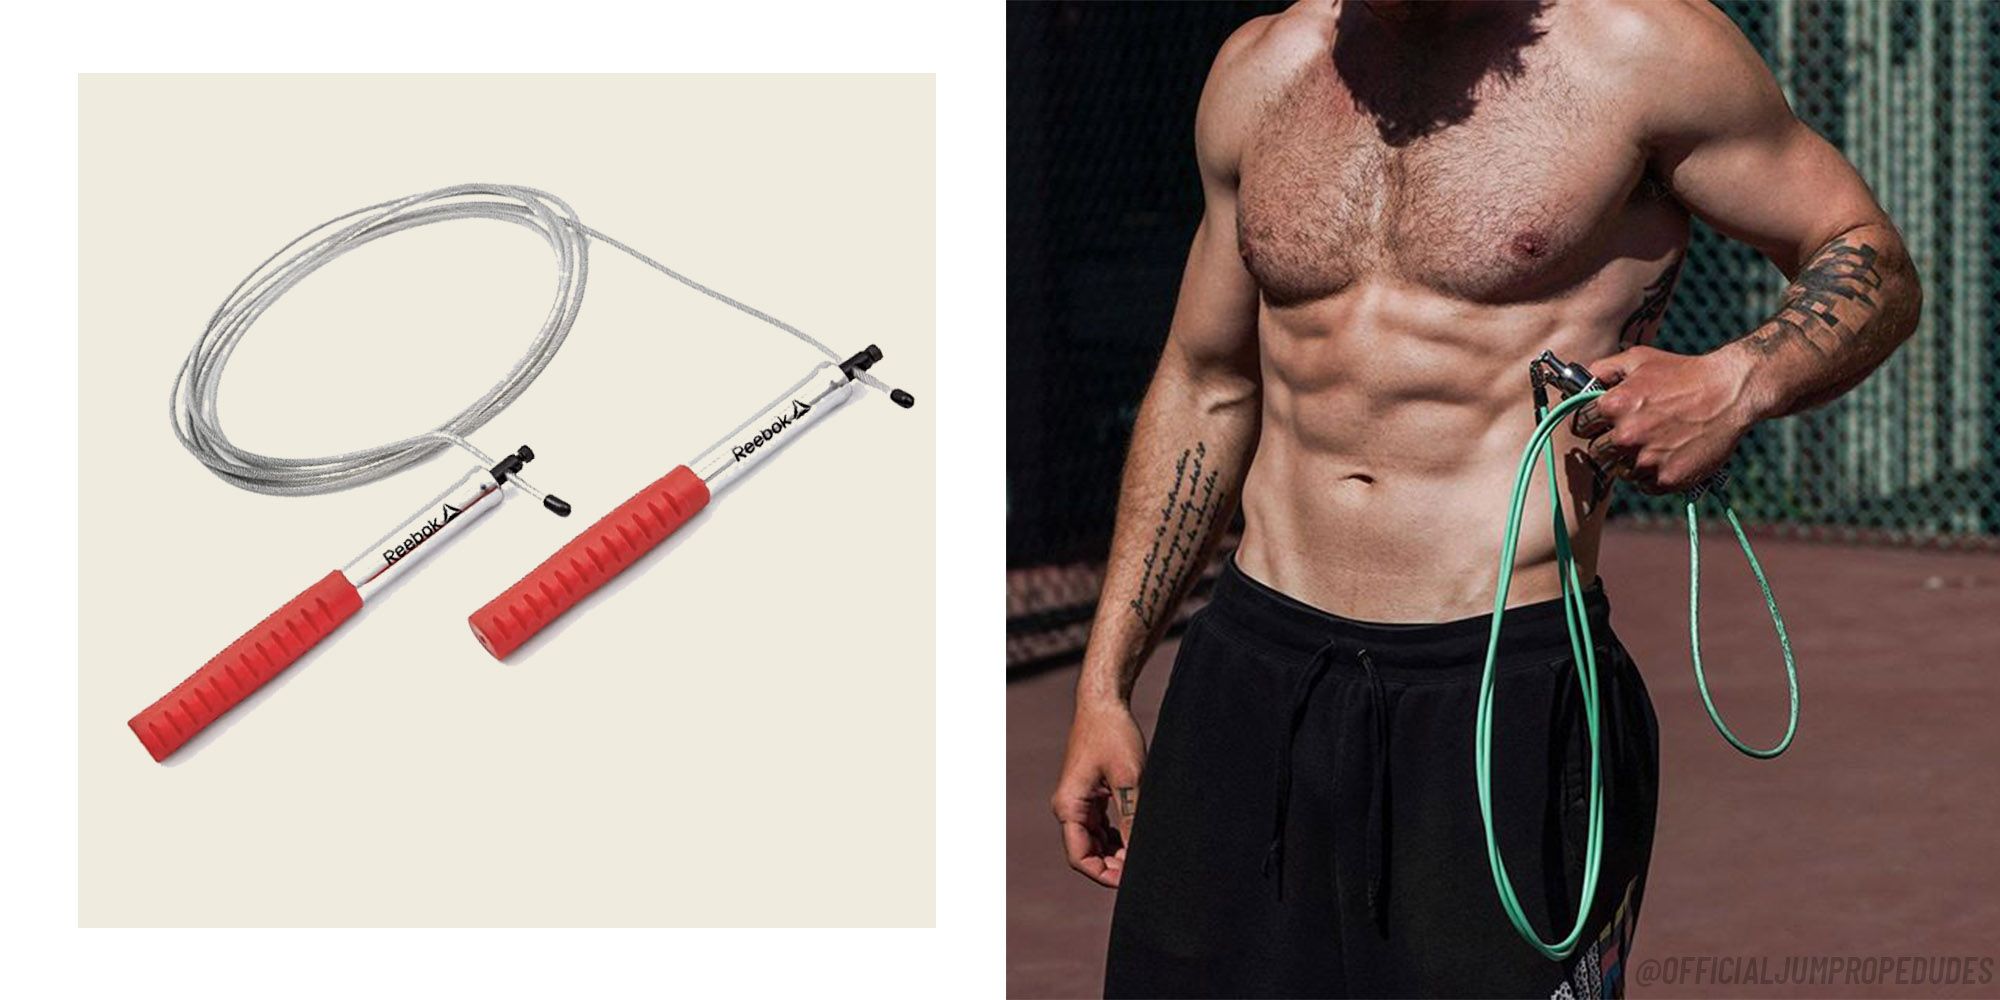 Premium Photo  Top view of weights with jump rope and sneakers